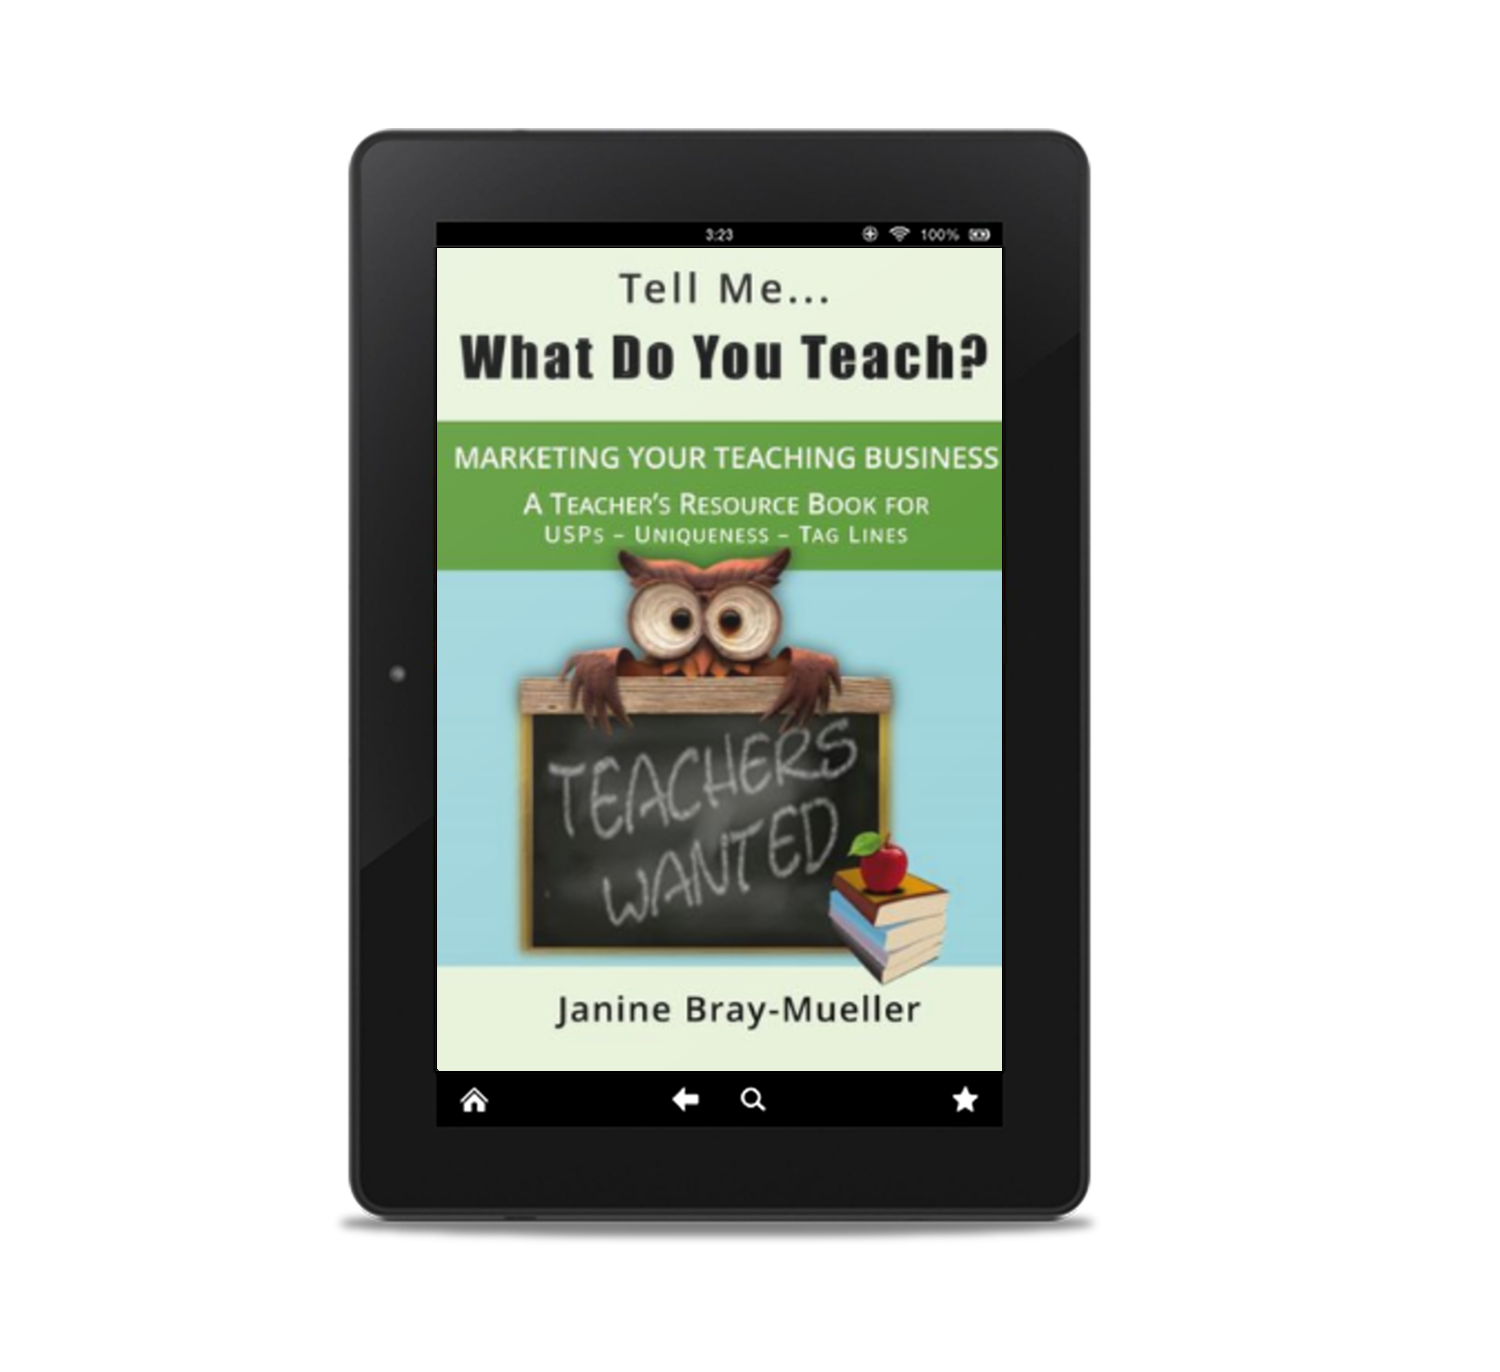 Tell Me... What Do You Teach? Janine Bray-Mueller Book Cover